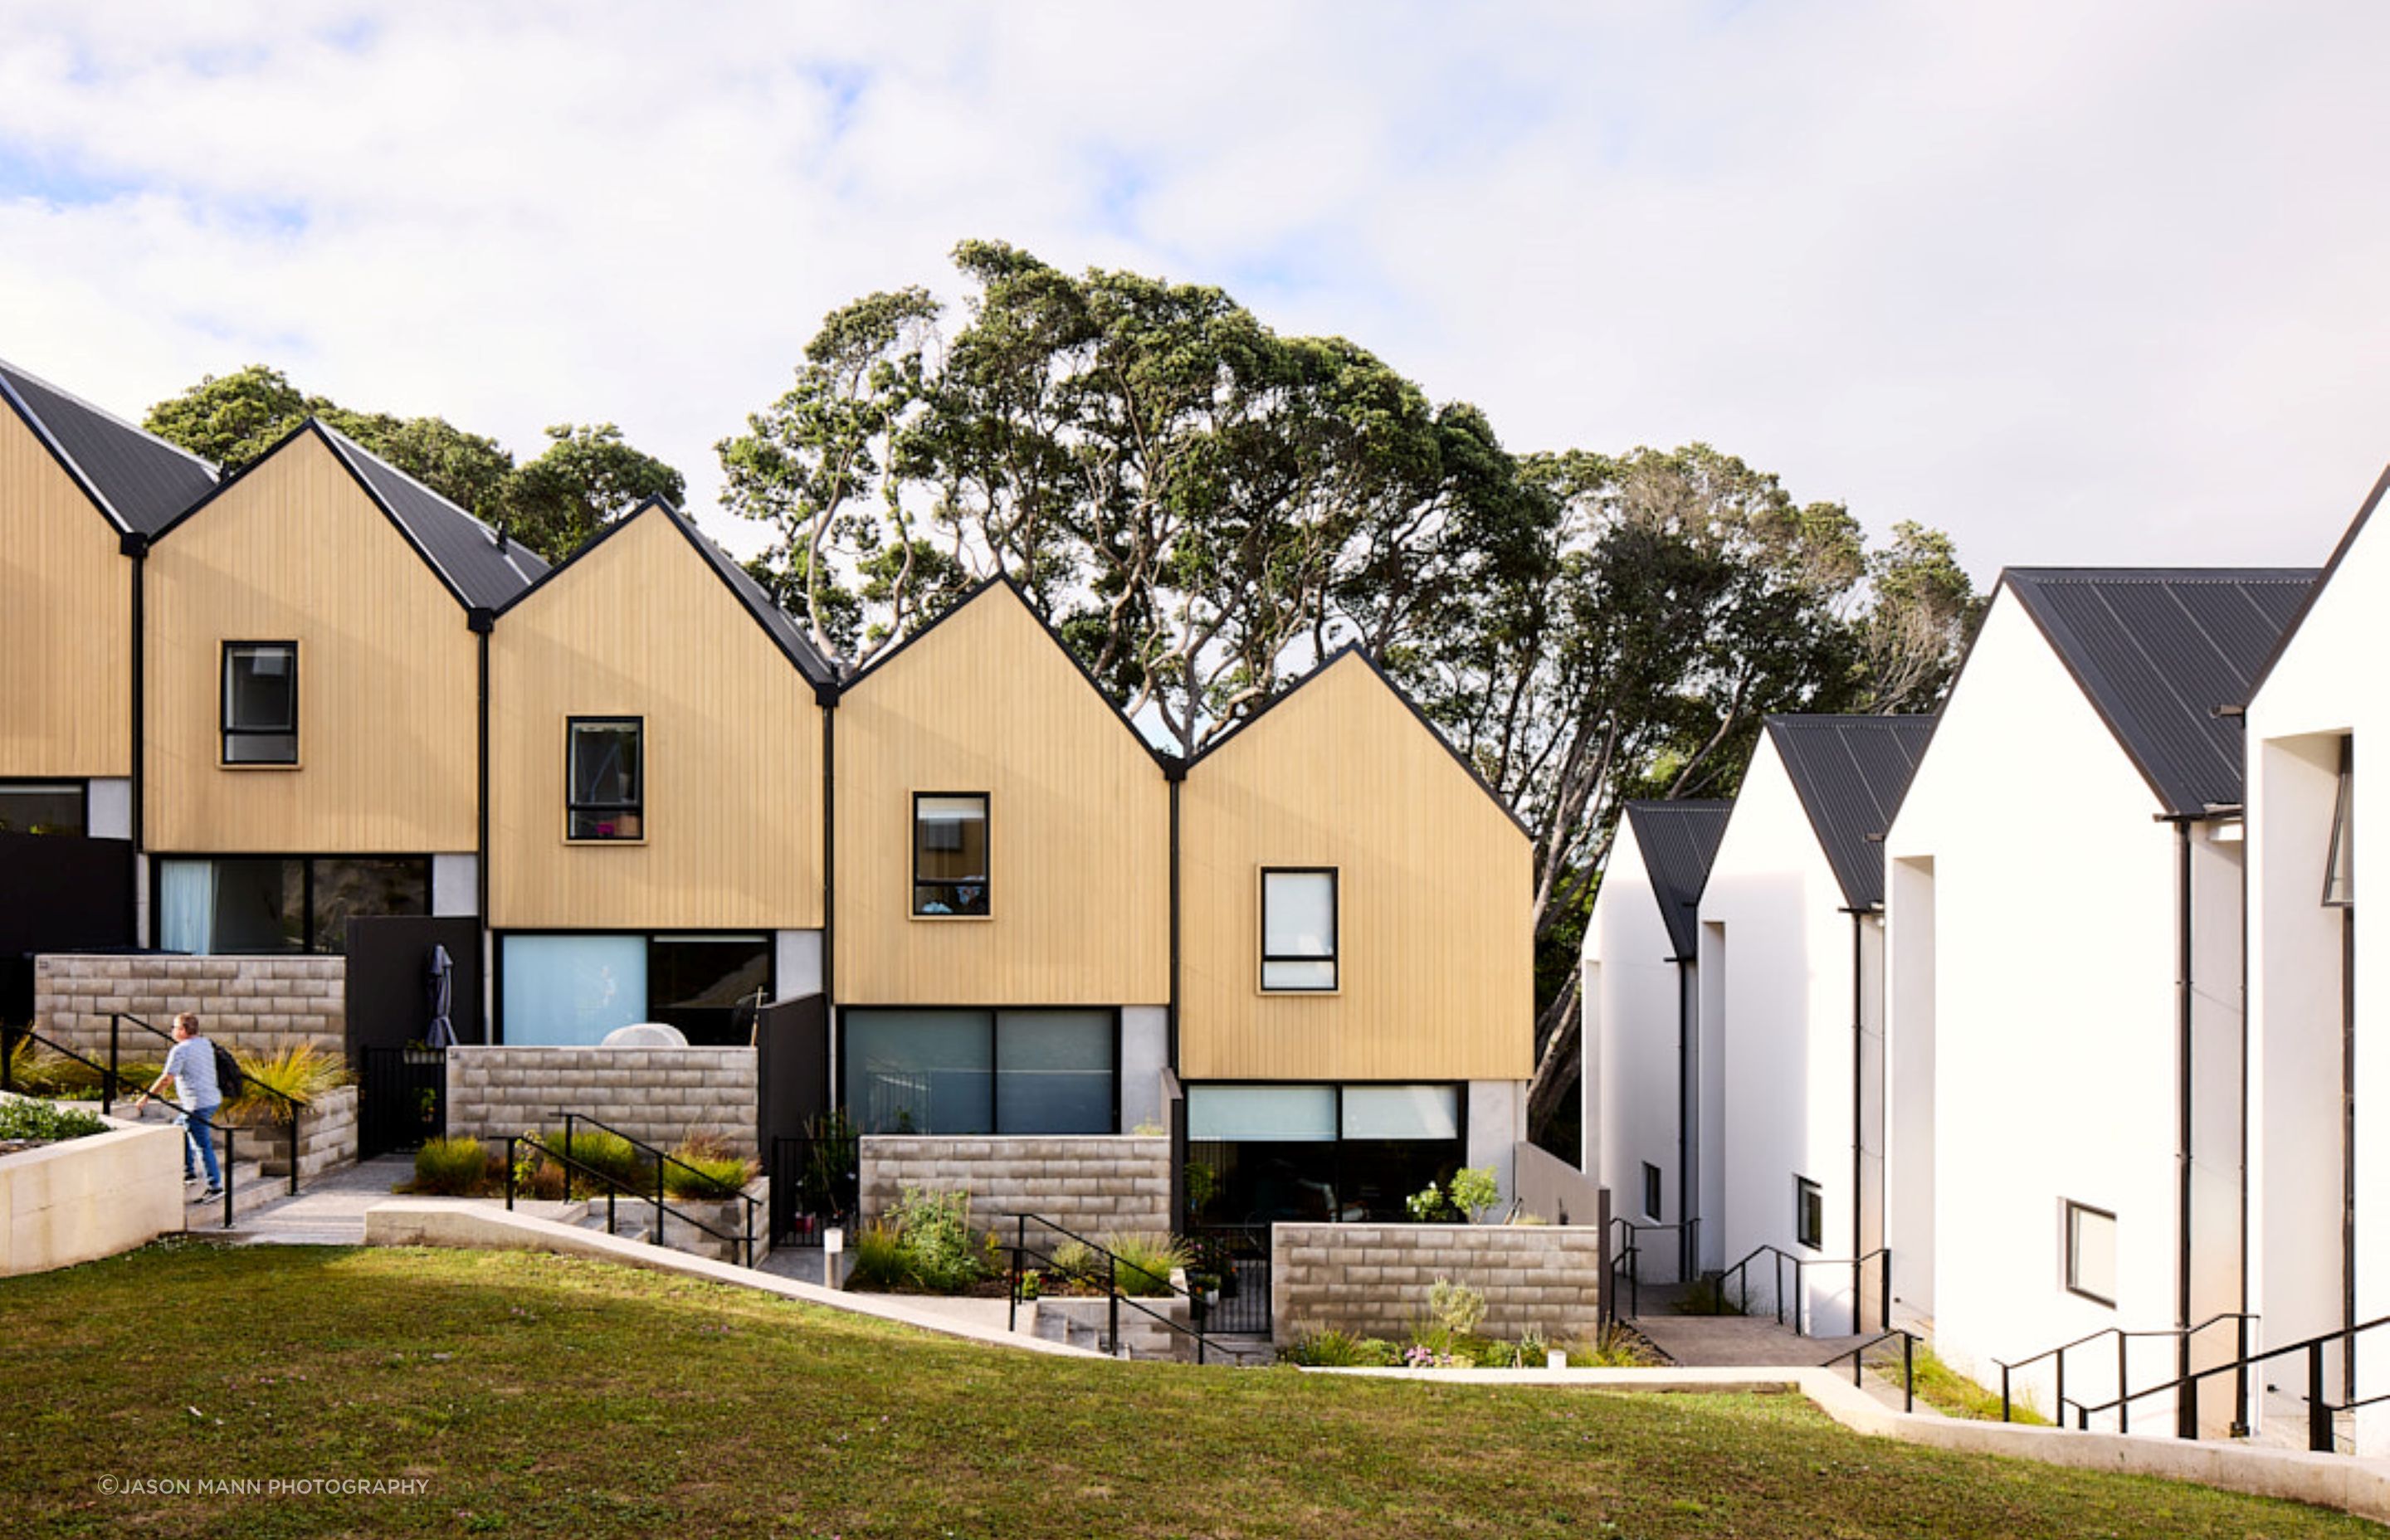 Terraced townhouses step down the site, and feature an asymmetrical roof pitch.